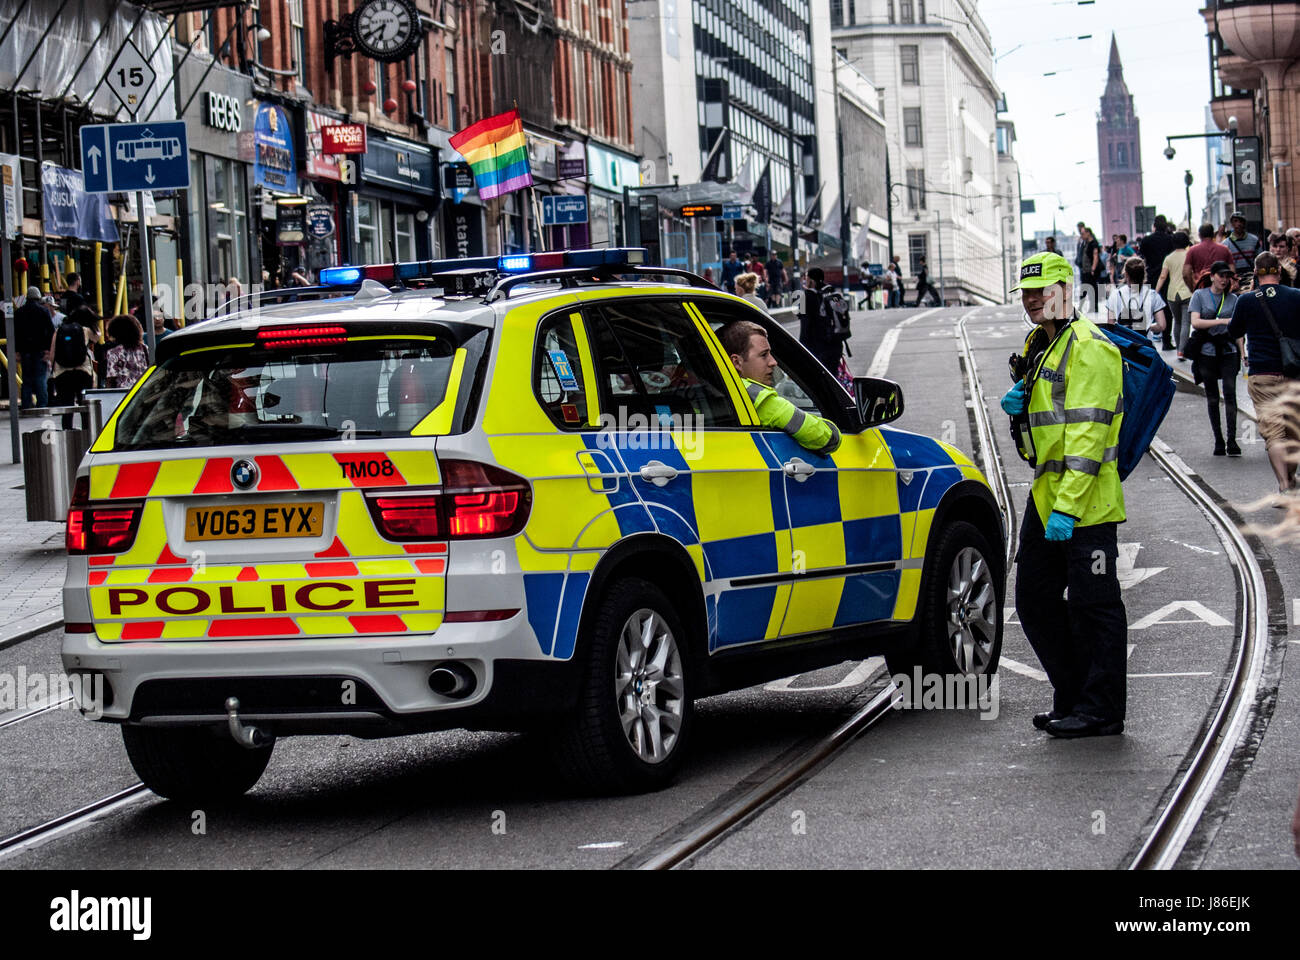 Birmingham, United Kingdom. 27th May 2017.  Armed police patrol the streets amid hightened security in the wake o the manchester bombing as thousands of members of the LGBTQ community gathered today for the Birmingham Pride parade. The Birmingham Pride is an annual festival for the LGBTQ community usually taking place over the Spring Bank Holiday.  The event begins with a parade from Victoria Square in the city centre to the Gay Village in Hurst Street Credit: Jim Wood/Alamy Live News Stock Photo